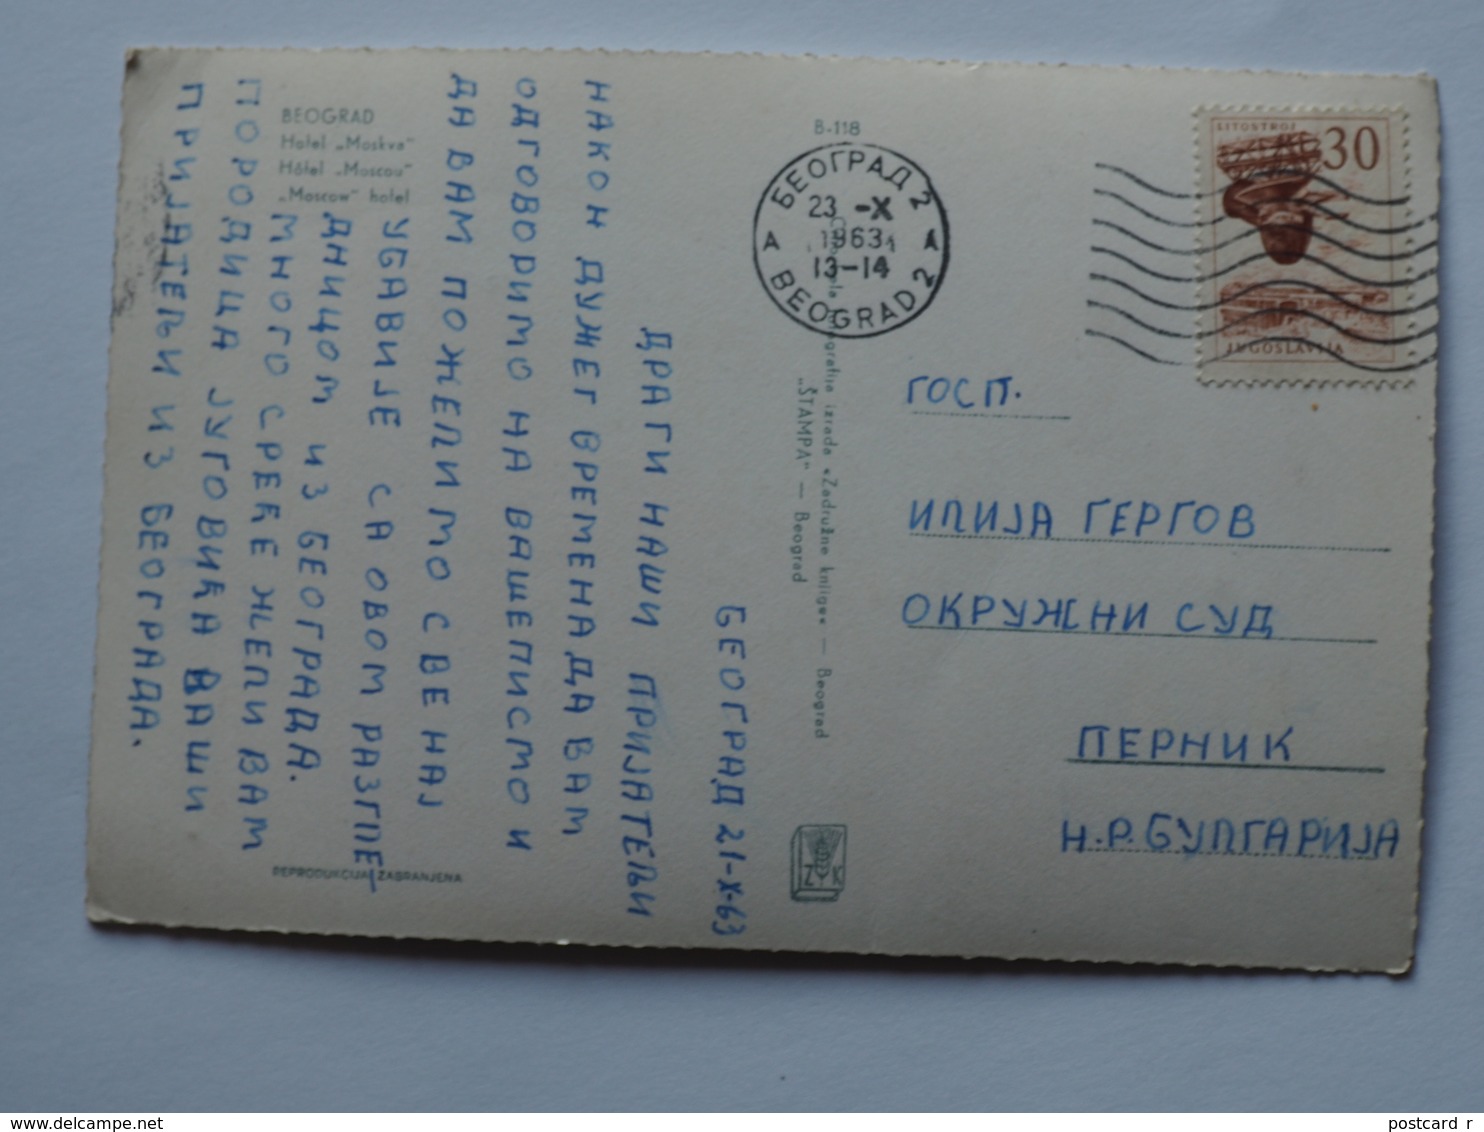 Serbia Beograd Hotel Moscow Stamp 1963      A 183 - Serbie